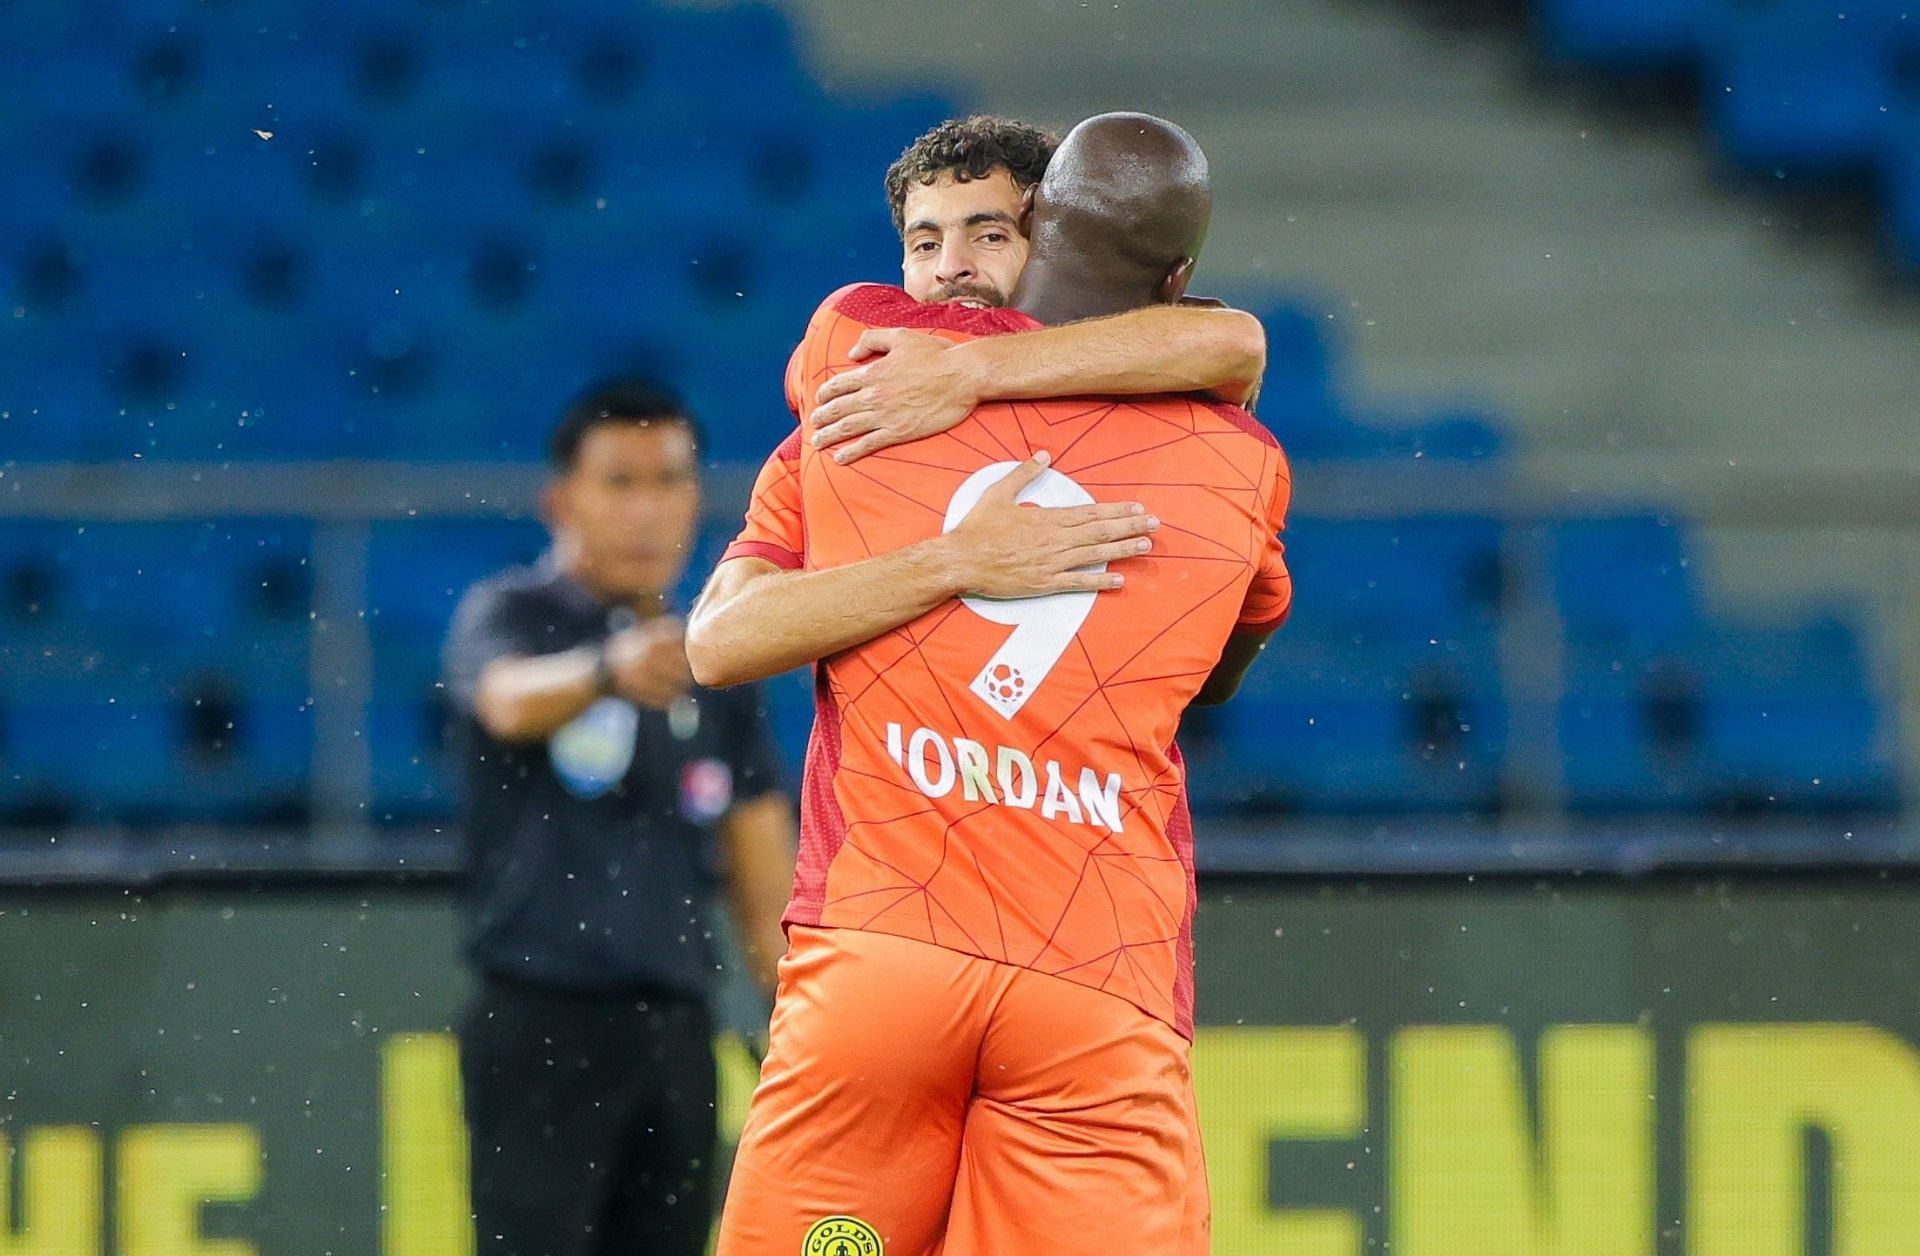 Madih Talal and Wilmar Jordan celebrating their goals against East Bengal FC.